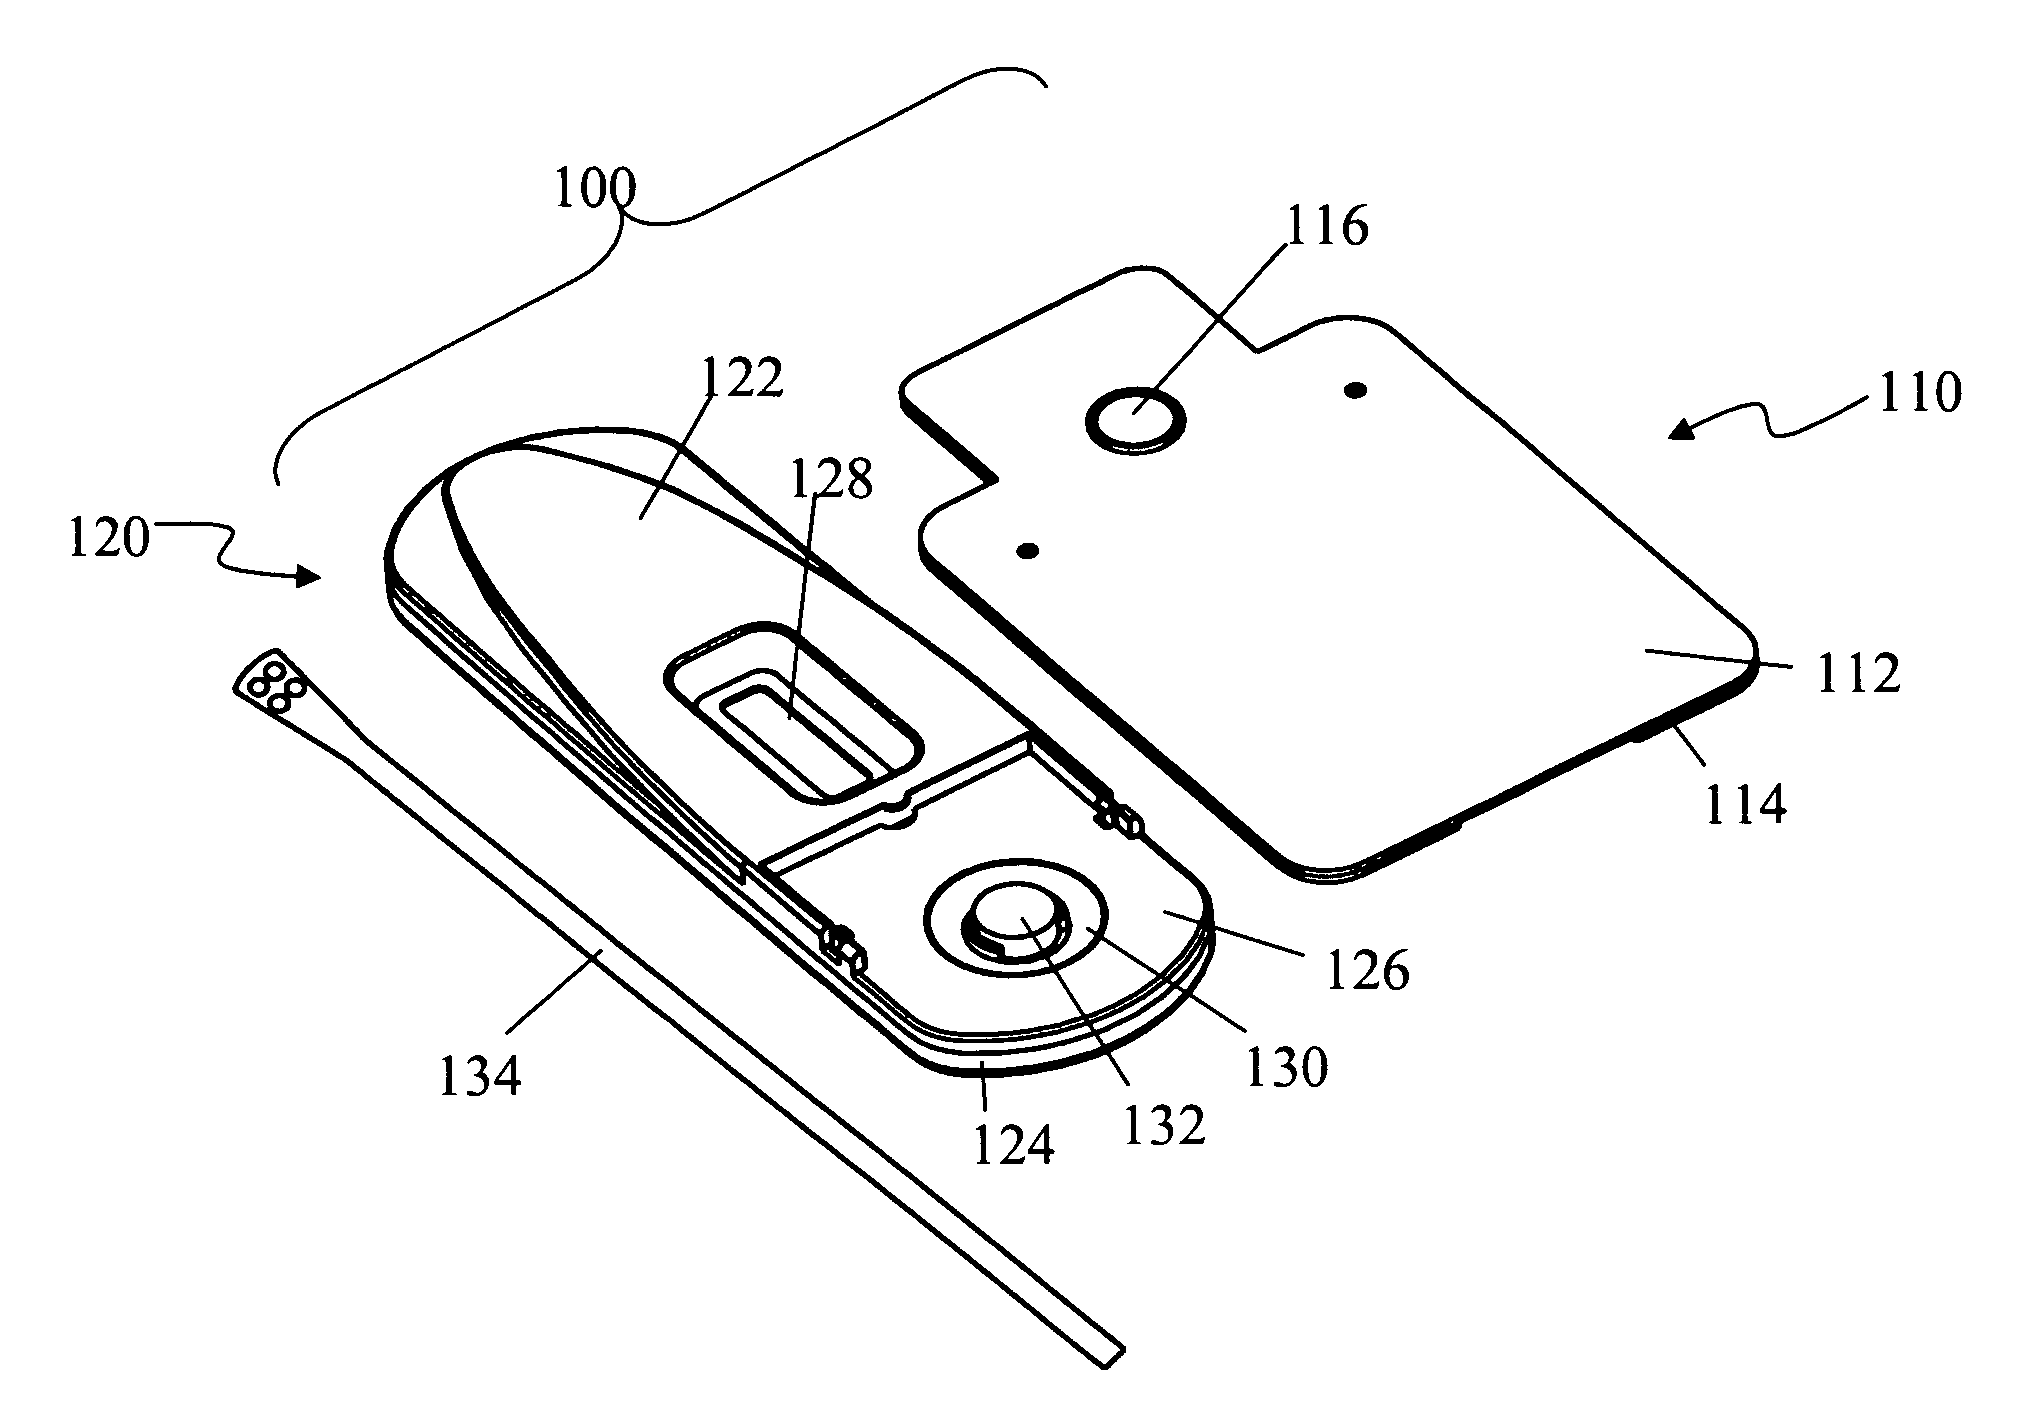 Devices and methods for sample collection and analysis